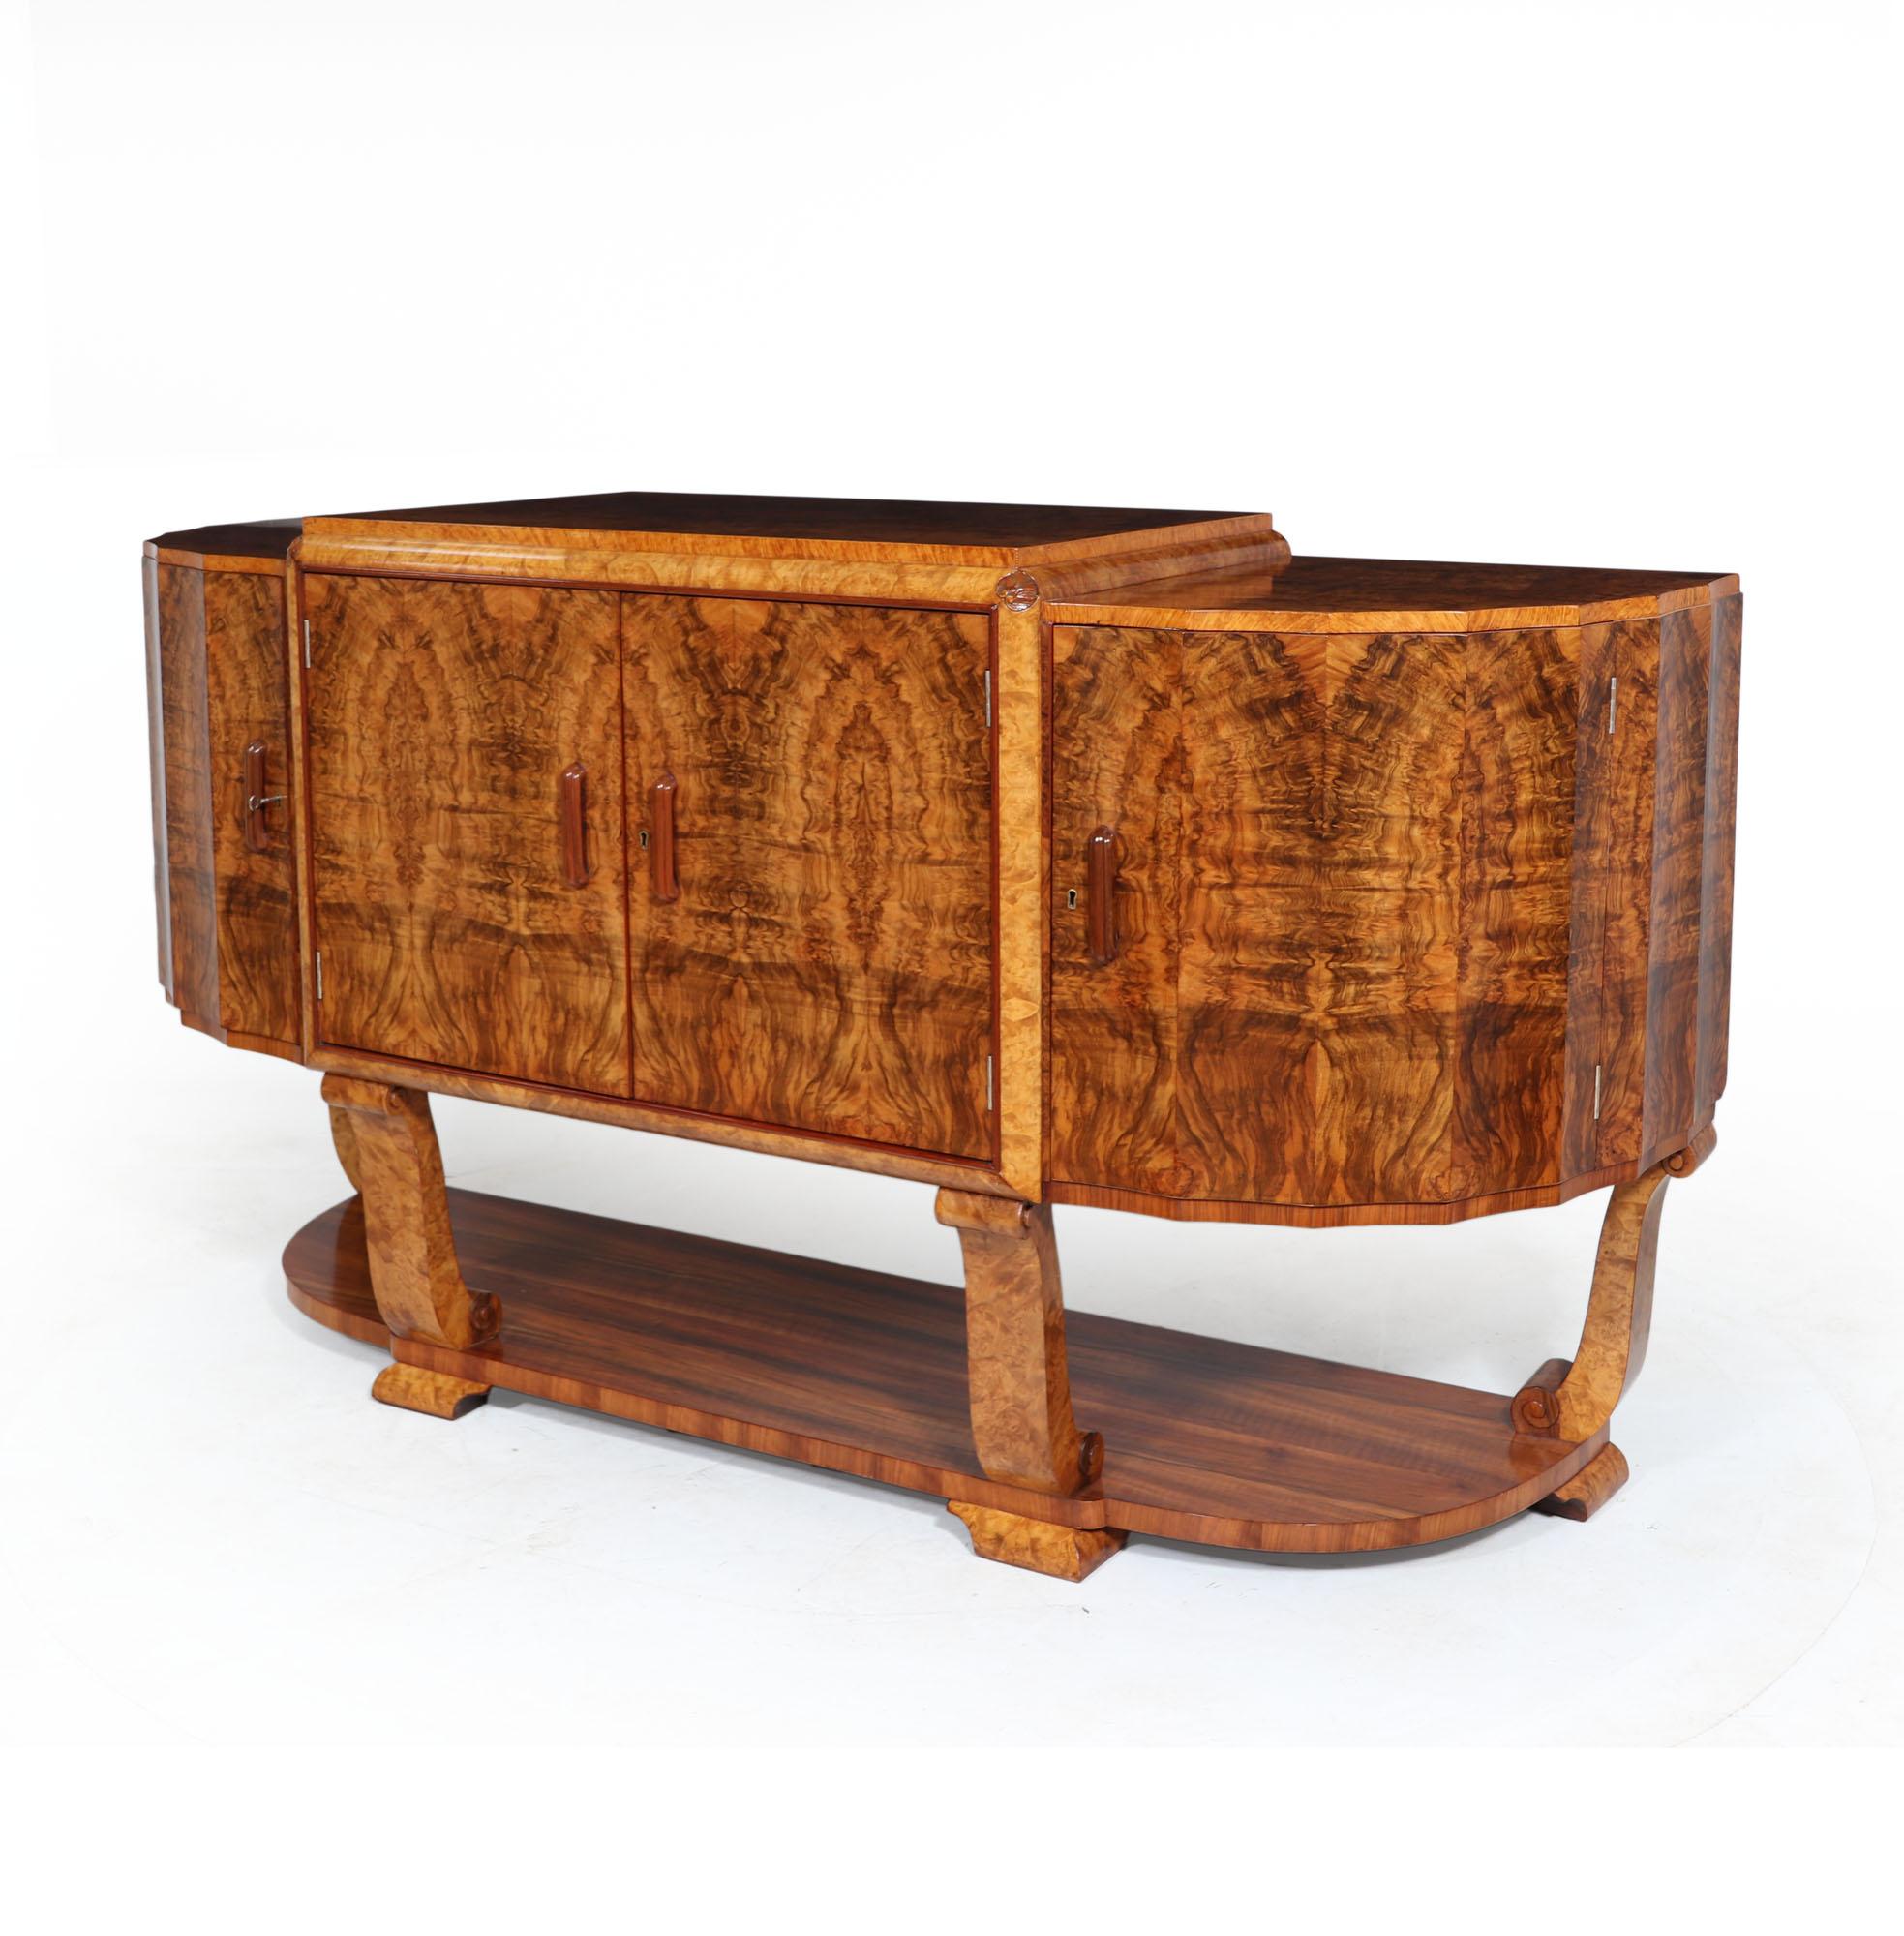 Art Deco sideboard by Hille.
An Art Deco sideboard produced in figured walnut by Hille in the 1930s, the sideboard is of exceptional quality featuring two central doors with drawers behind, either side are a further two doors these are curved and